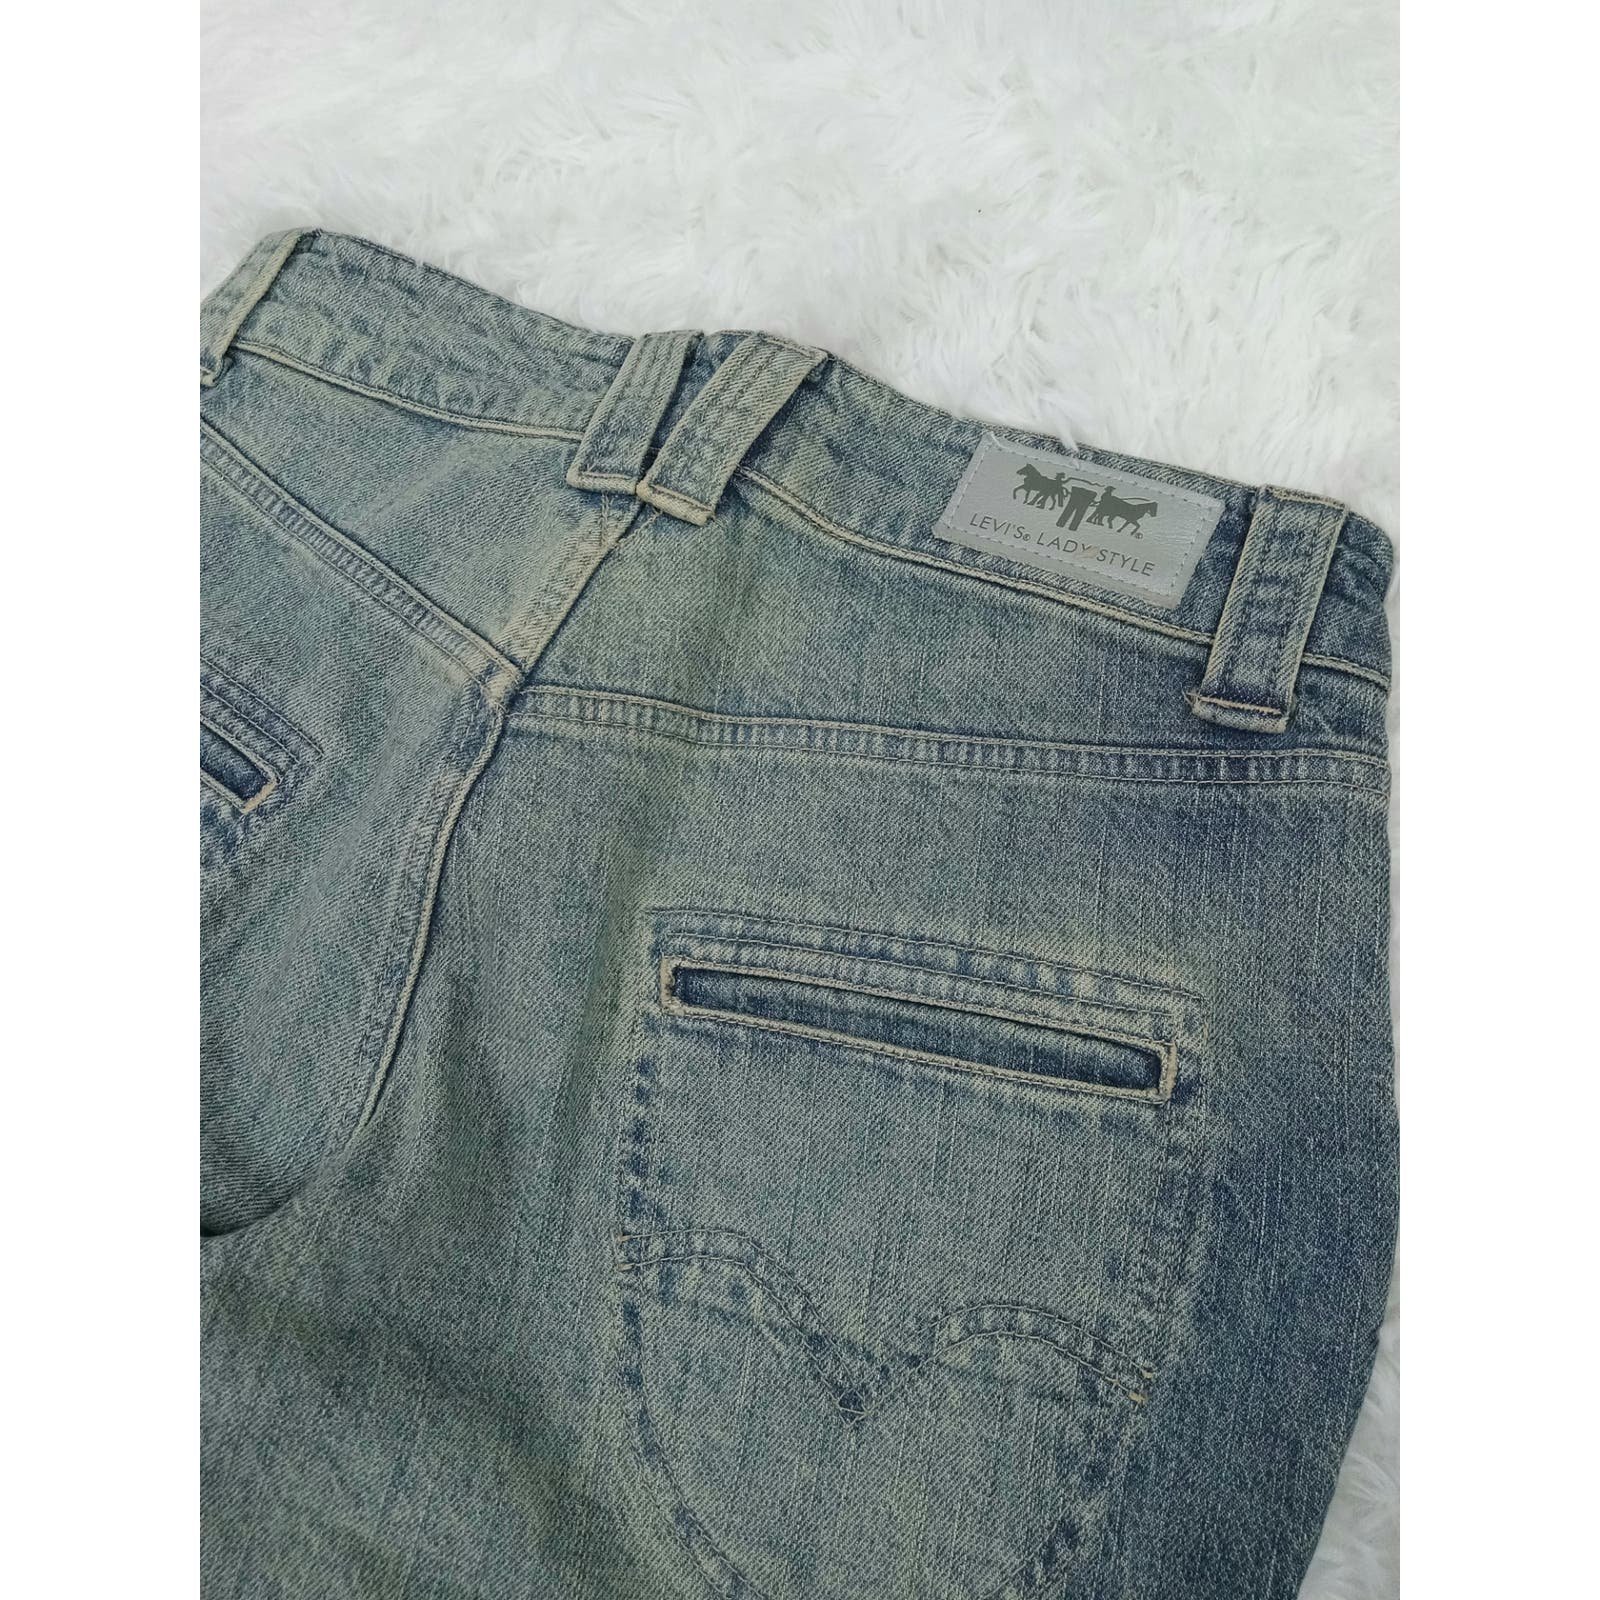 Promotions  Levi´s LADYSTYLE VTG 90´s 598 Low Rise Boot cut Jeans Women´s Size 33 MYUtLD9fs Great